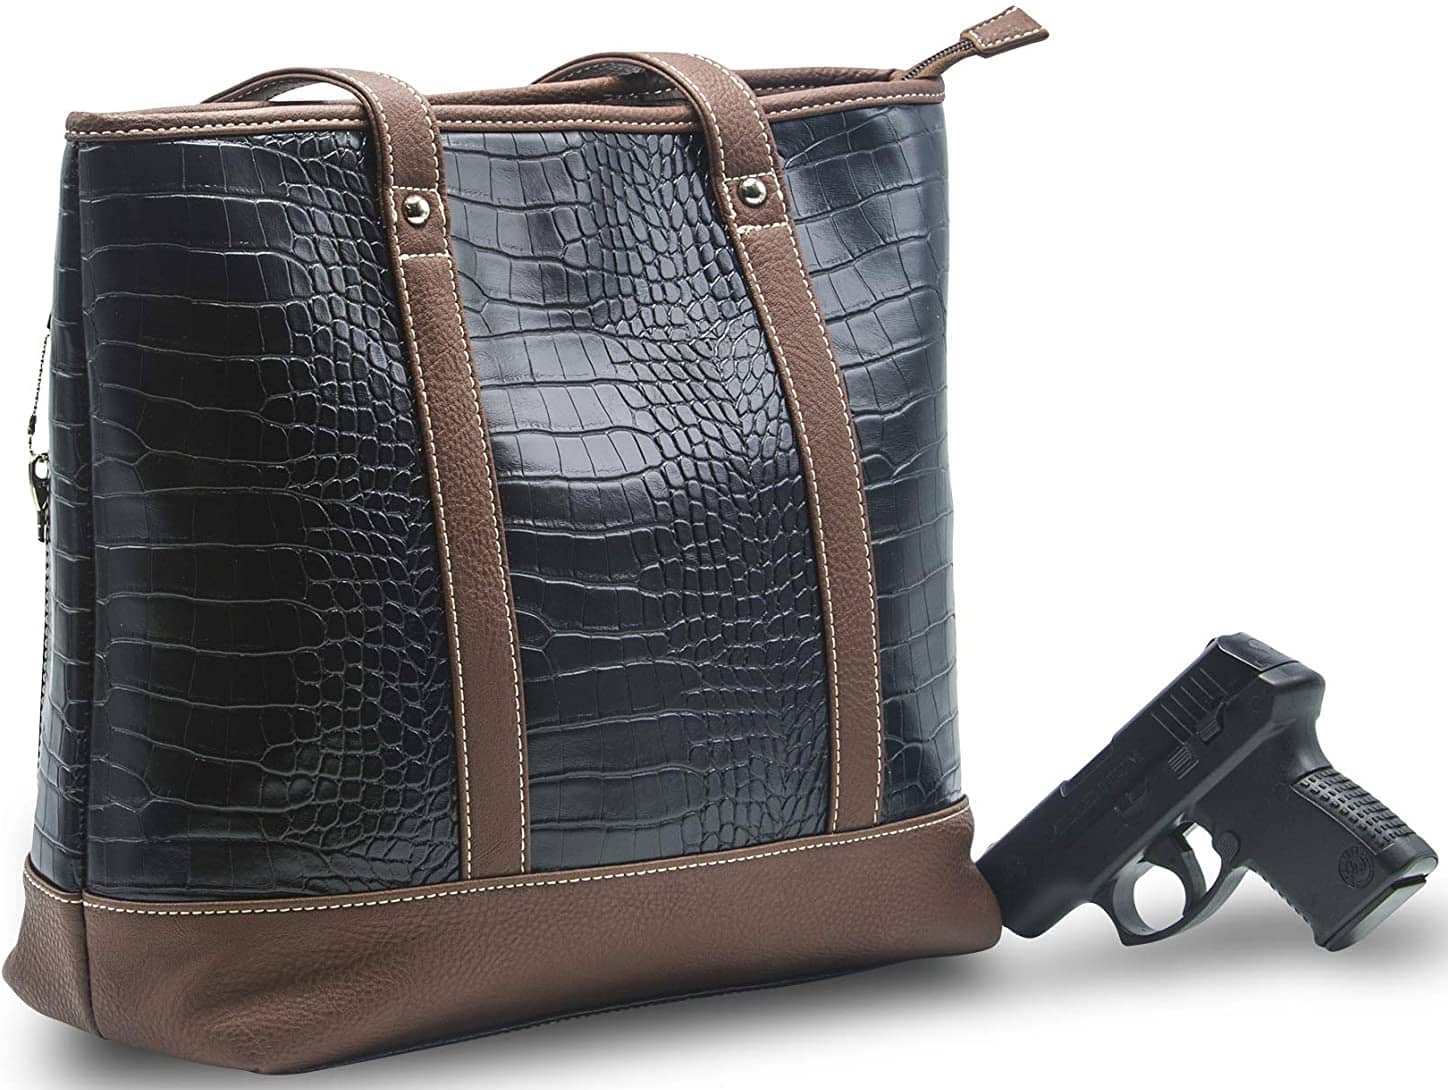 The Goson concealed carry is designed to keep you and your weapon safe with its multiple special pockets